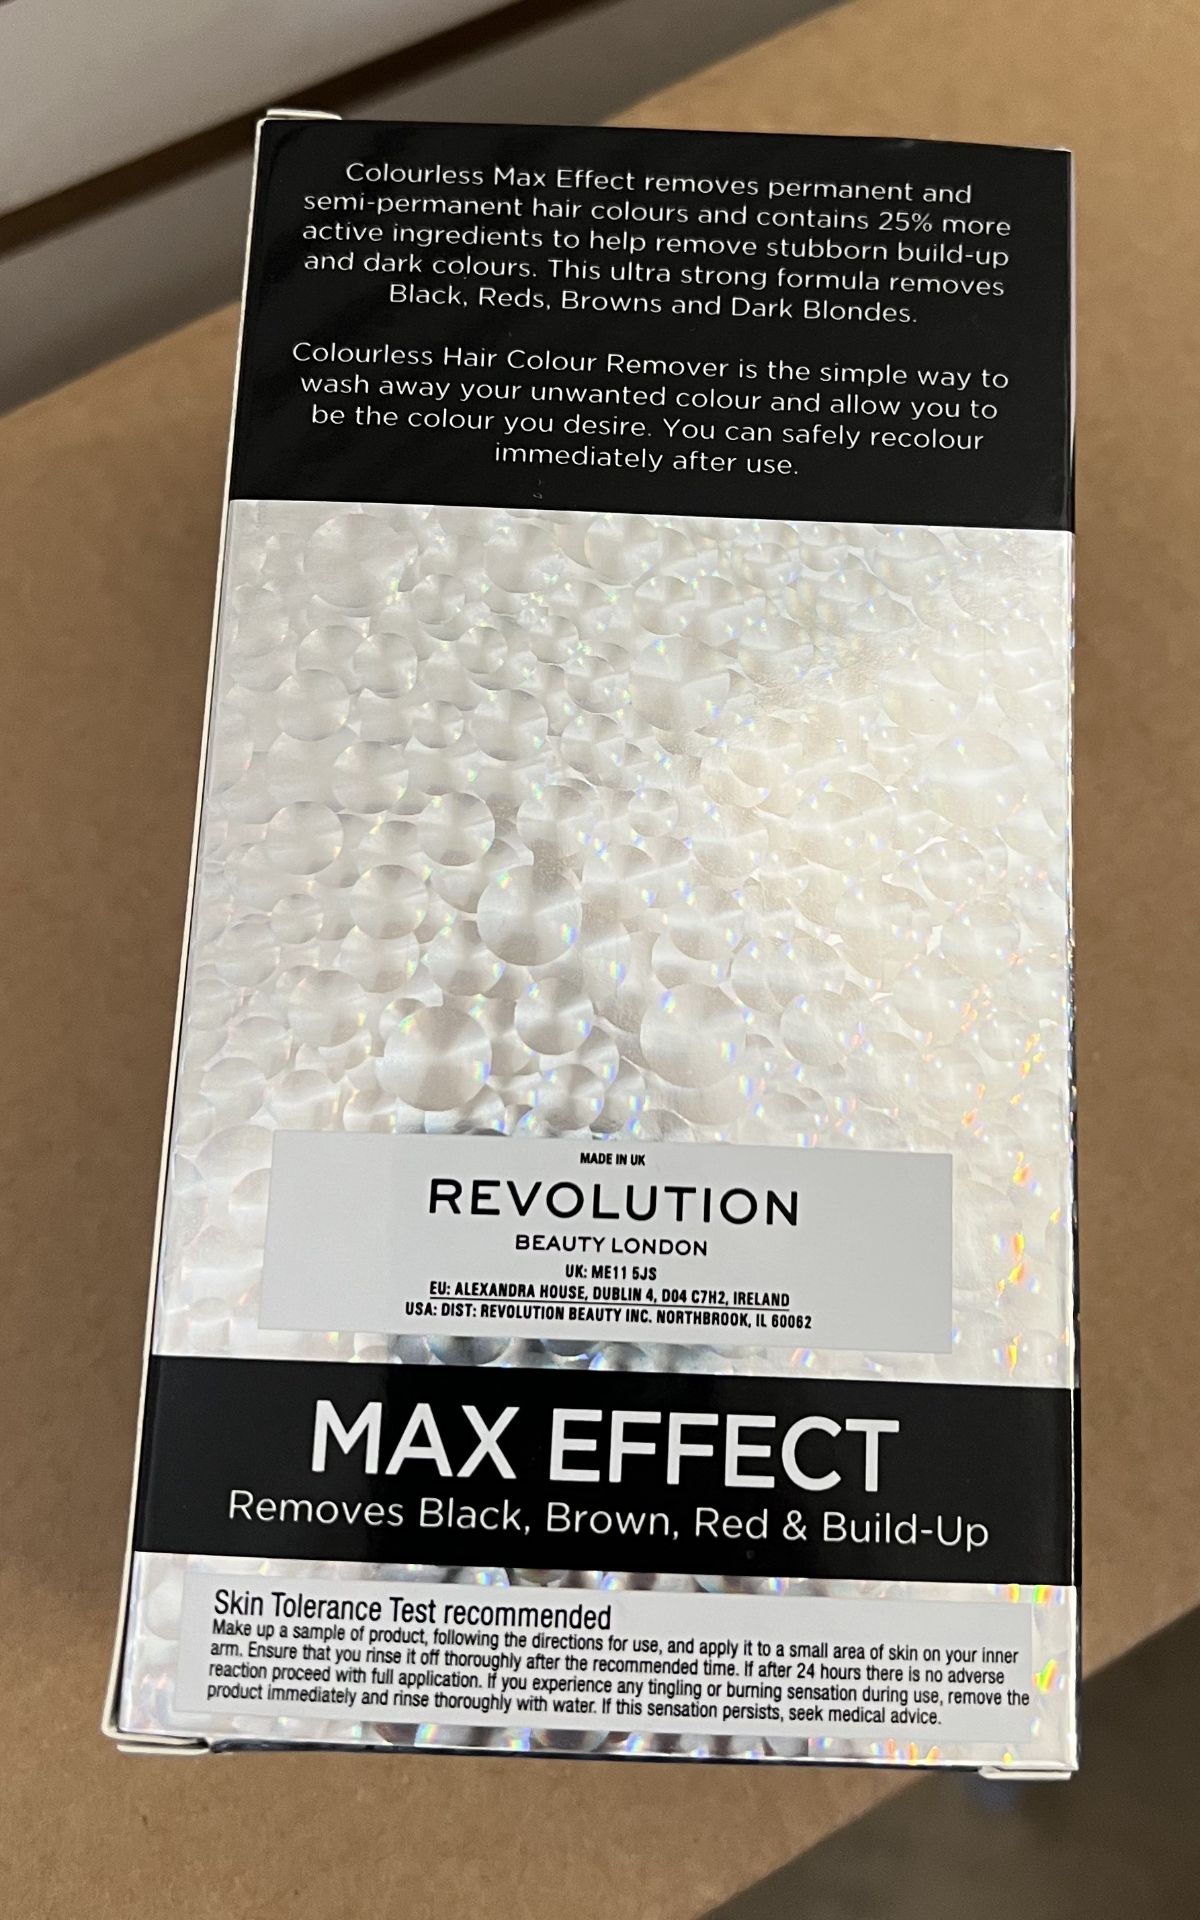 36 x Revolution London Colourless Max Effect Hair Colour Remover - Image 5 of 7